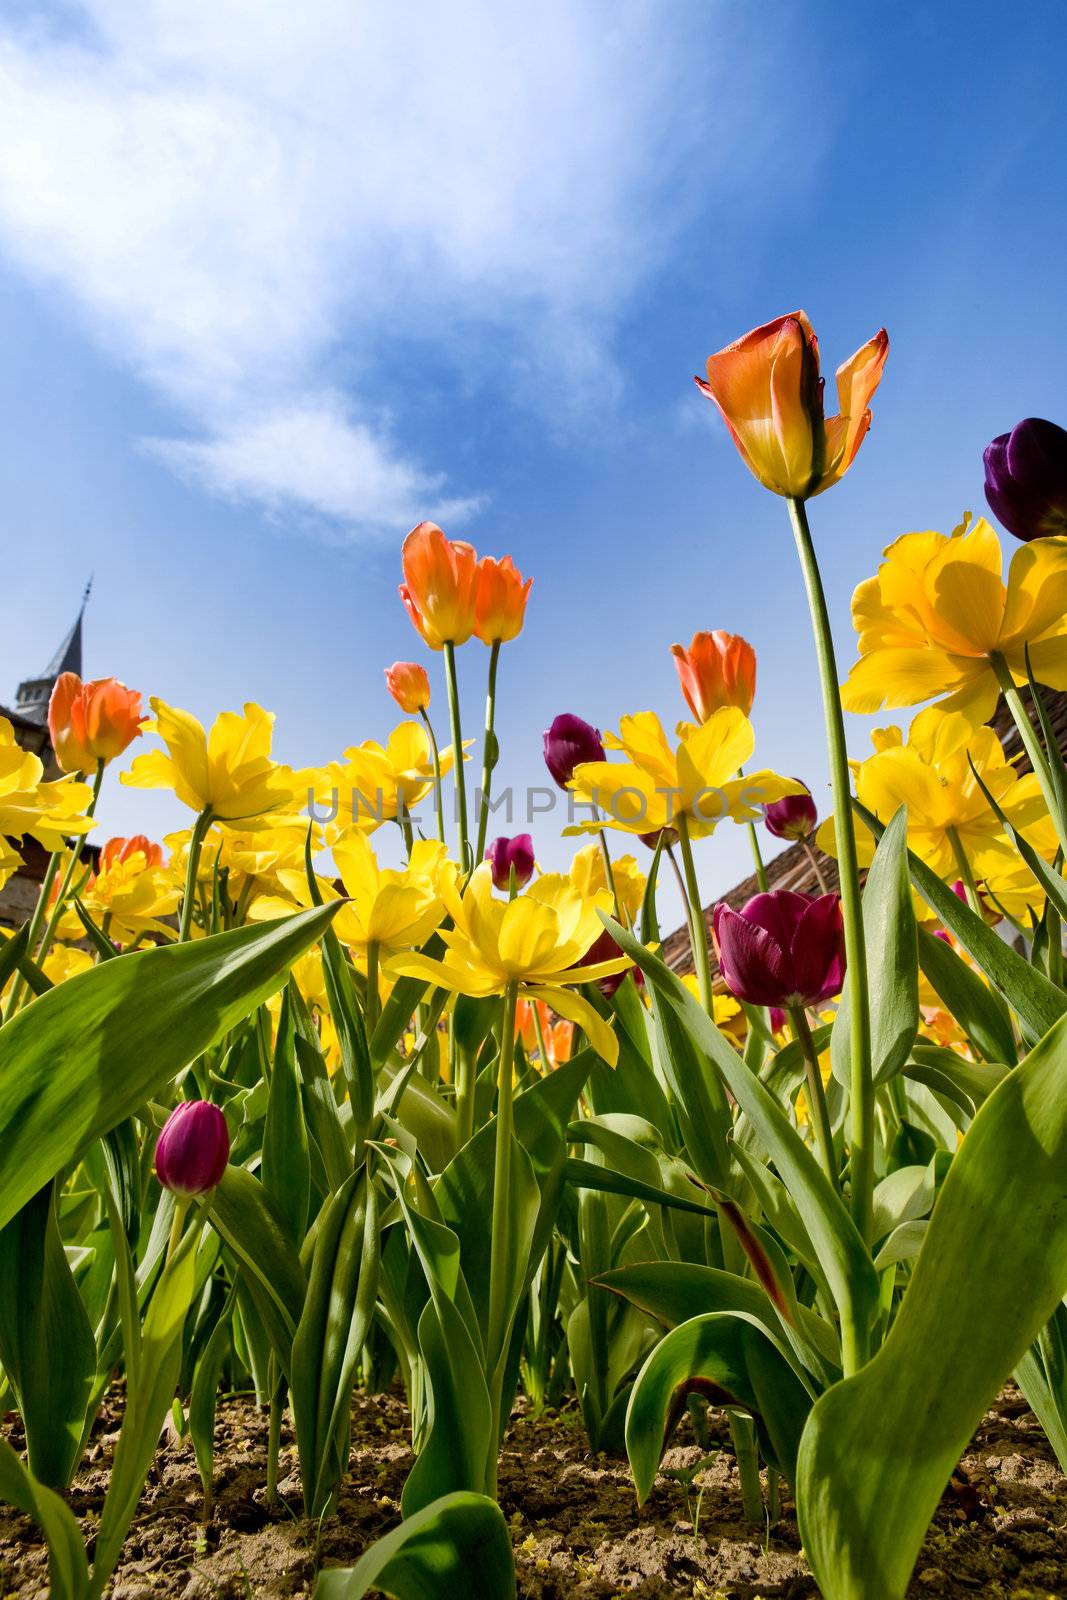 A flower bed with yellow orange and purple tulips and daffodils against a blue sky